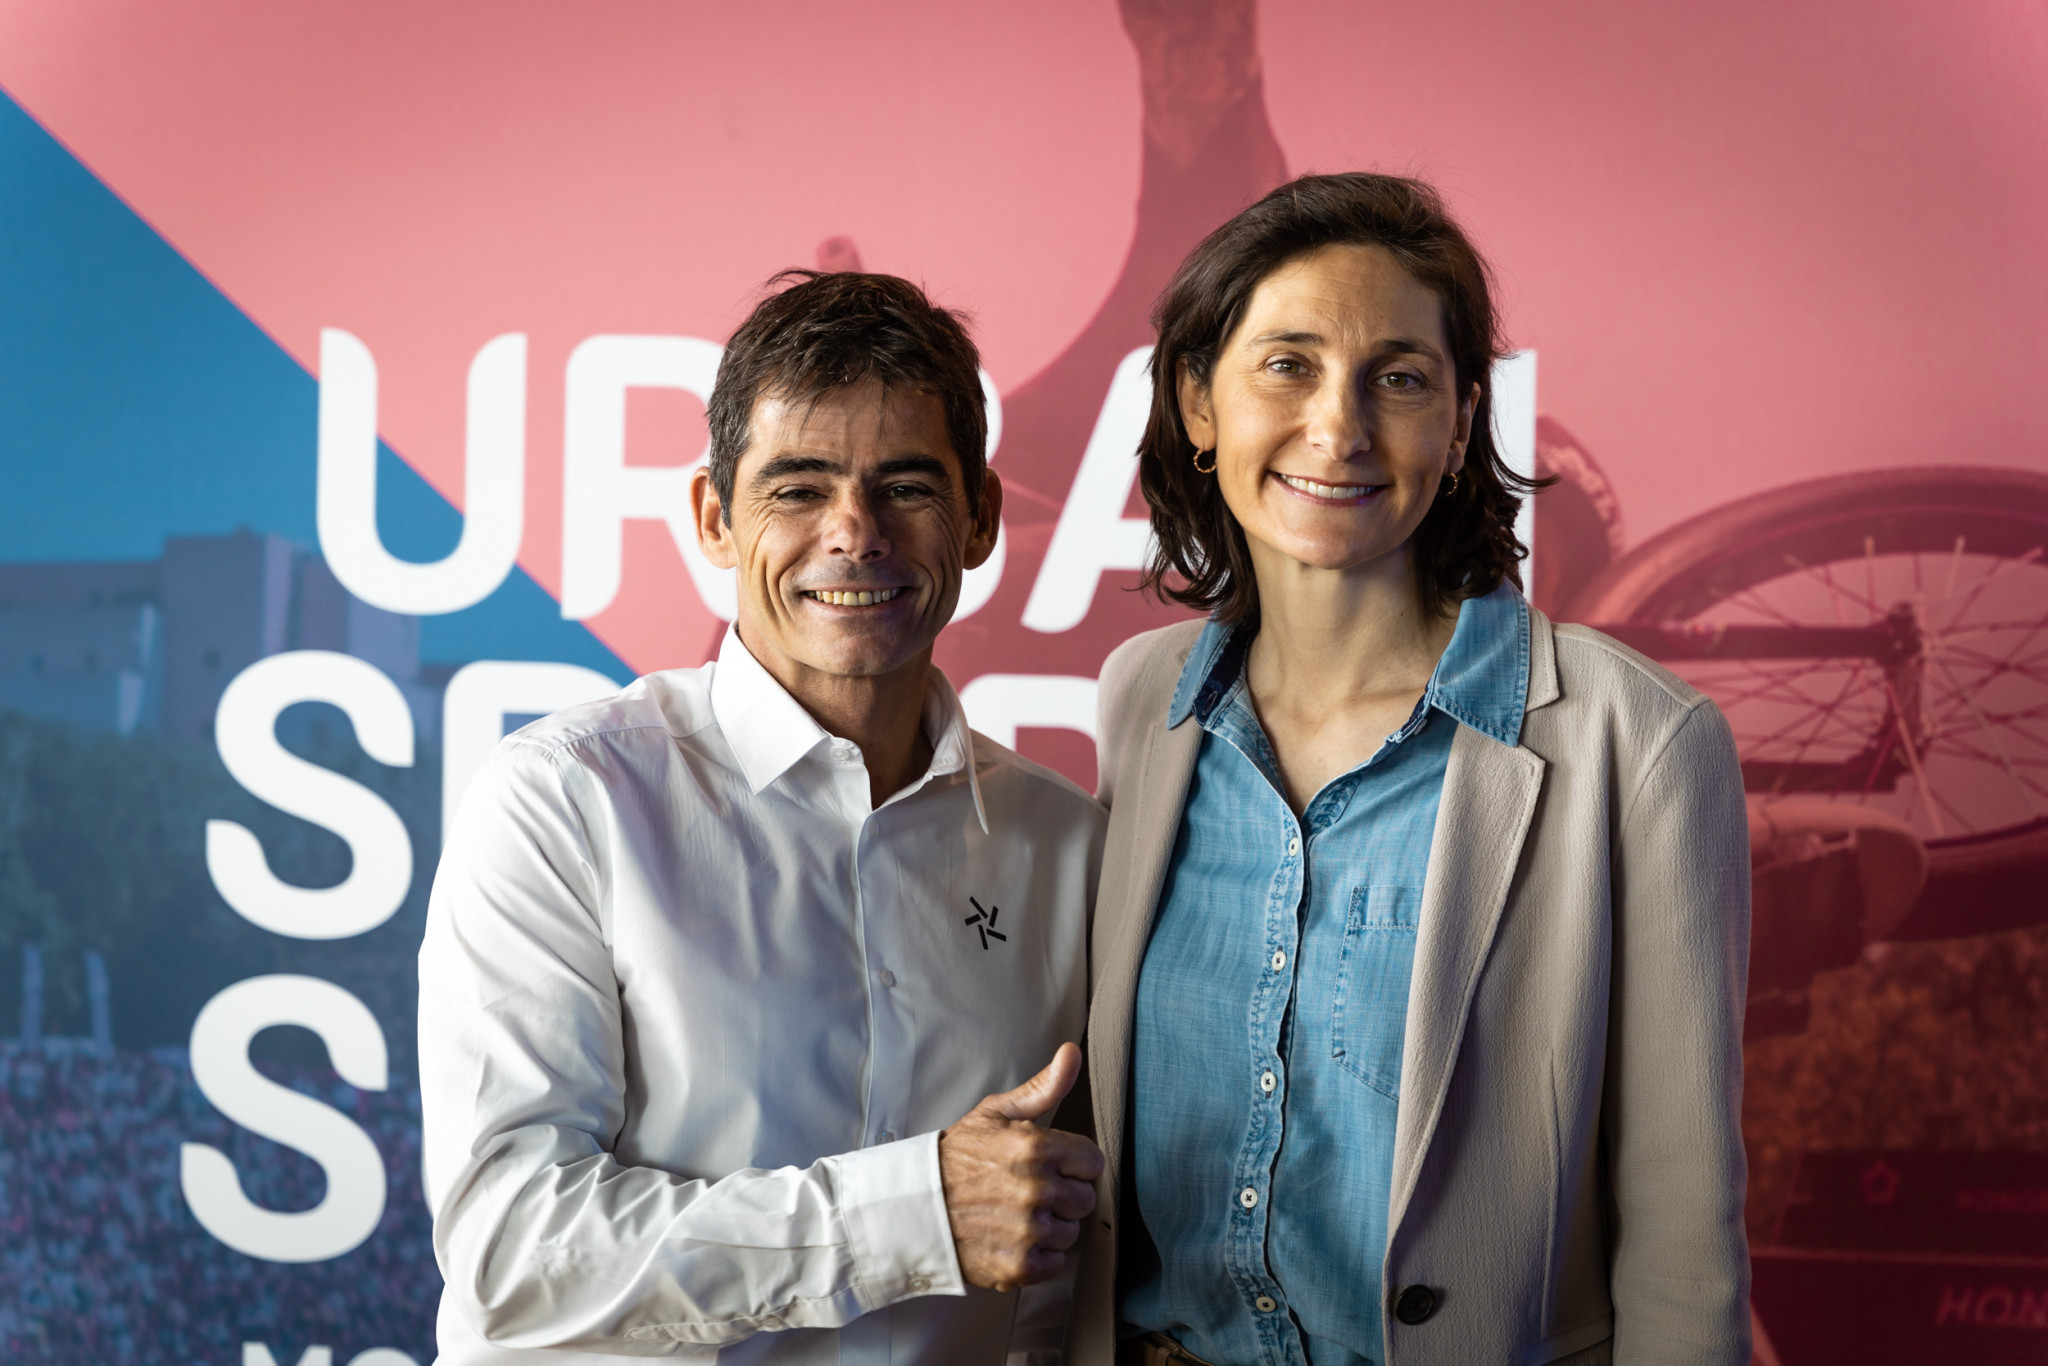 Oudéa-Castéra was full of praise for FISE Montpellier, which has established itself as the premier urban sports event since its inaugural edition in 1997, and even described founder Hervé André-Benoît, left, as a 